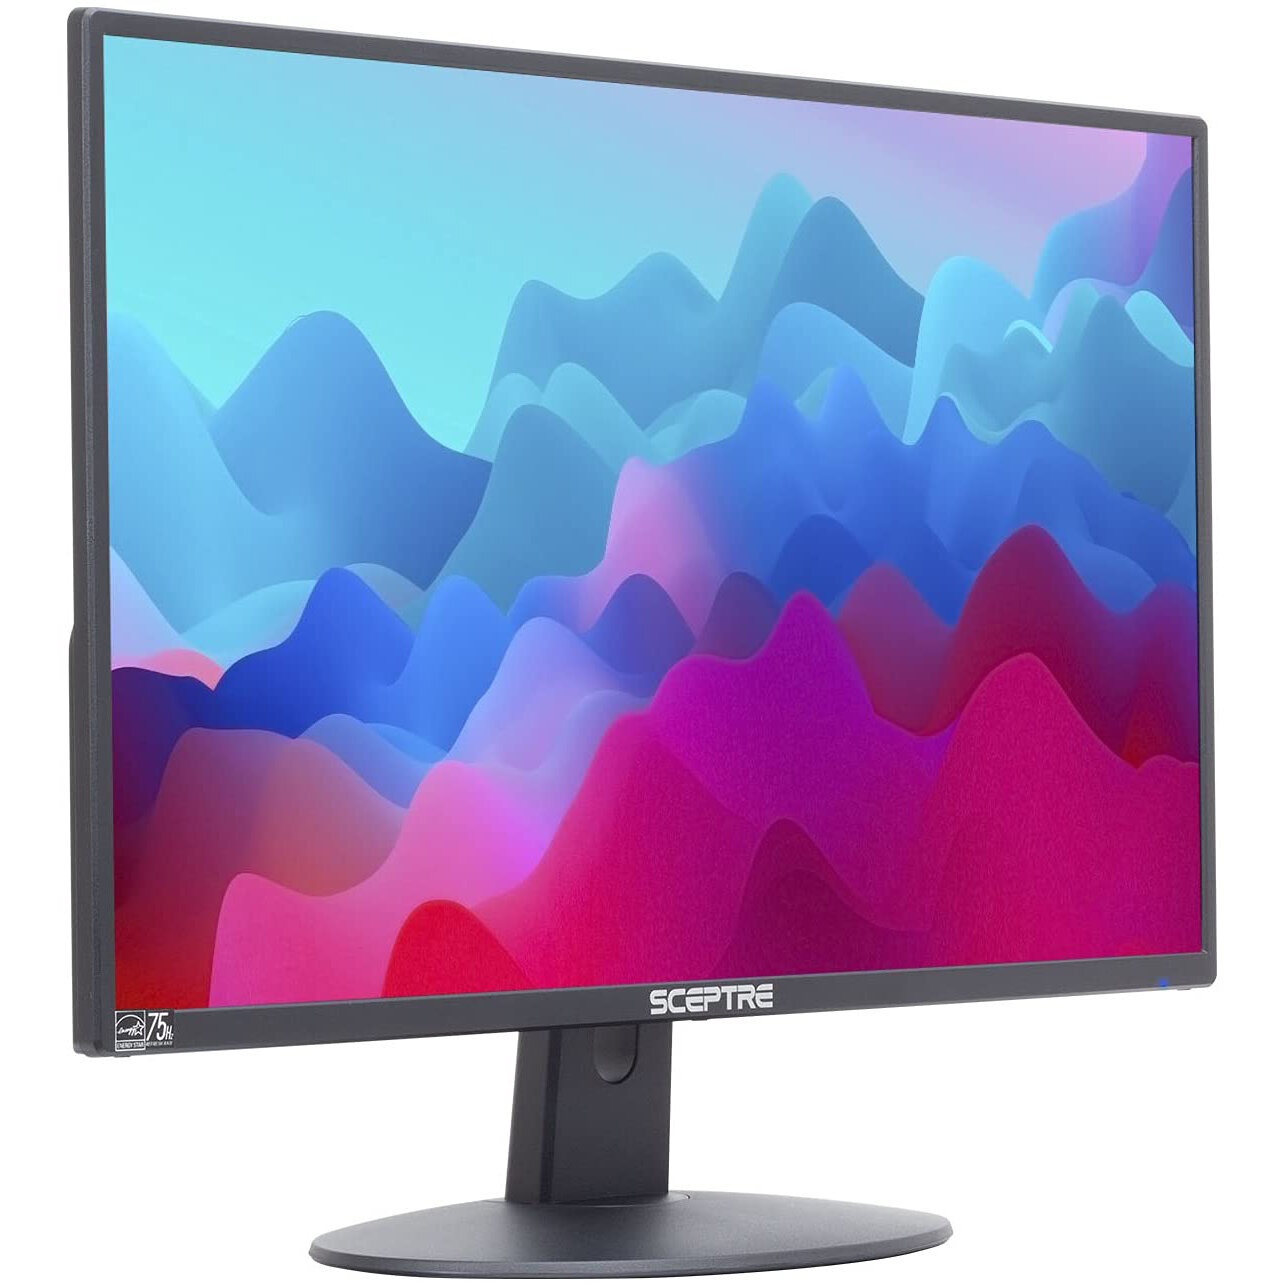 Sceptre 20" 1600x900 75Hz Thin LED Monitor 2x HDM VGA Built-in Speakers Machine Black Wide Viewing Angle 170° (Horizontal) / 160° (Vertical)